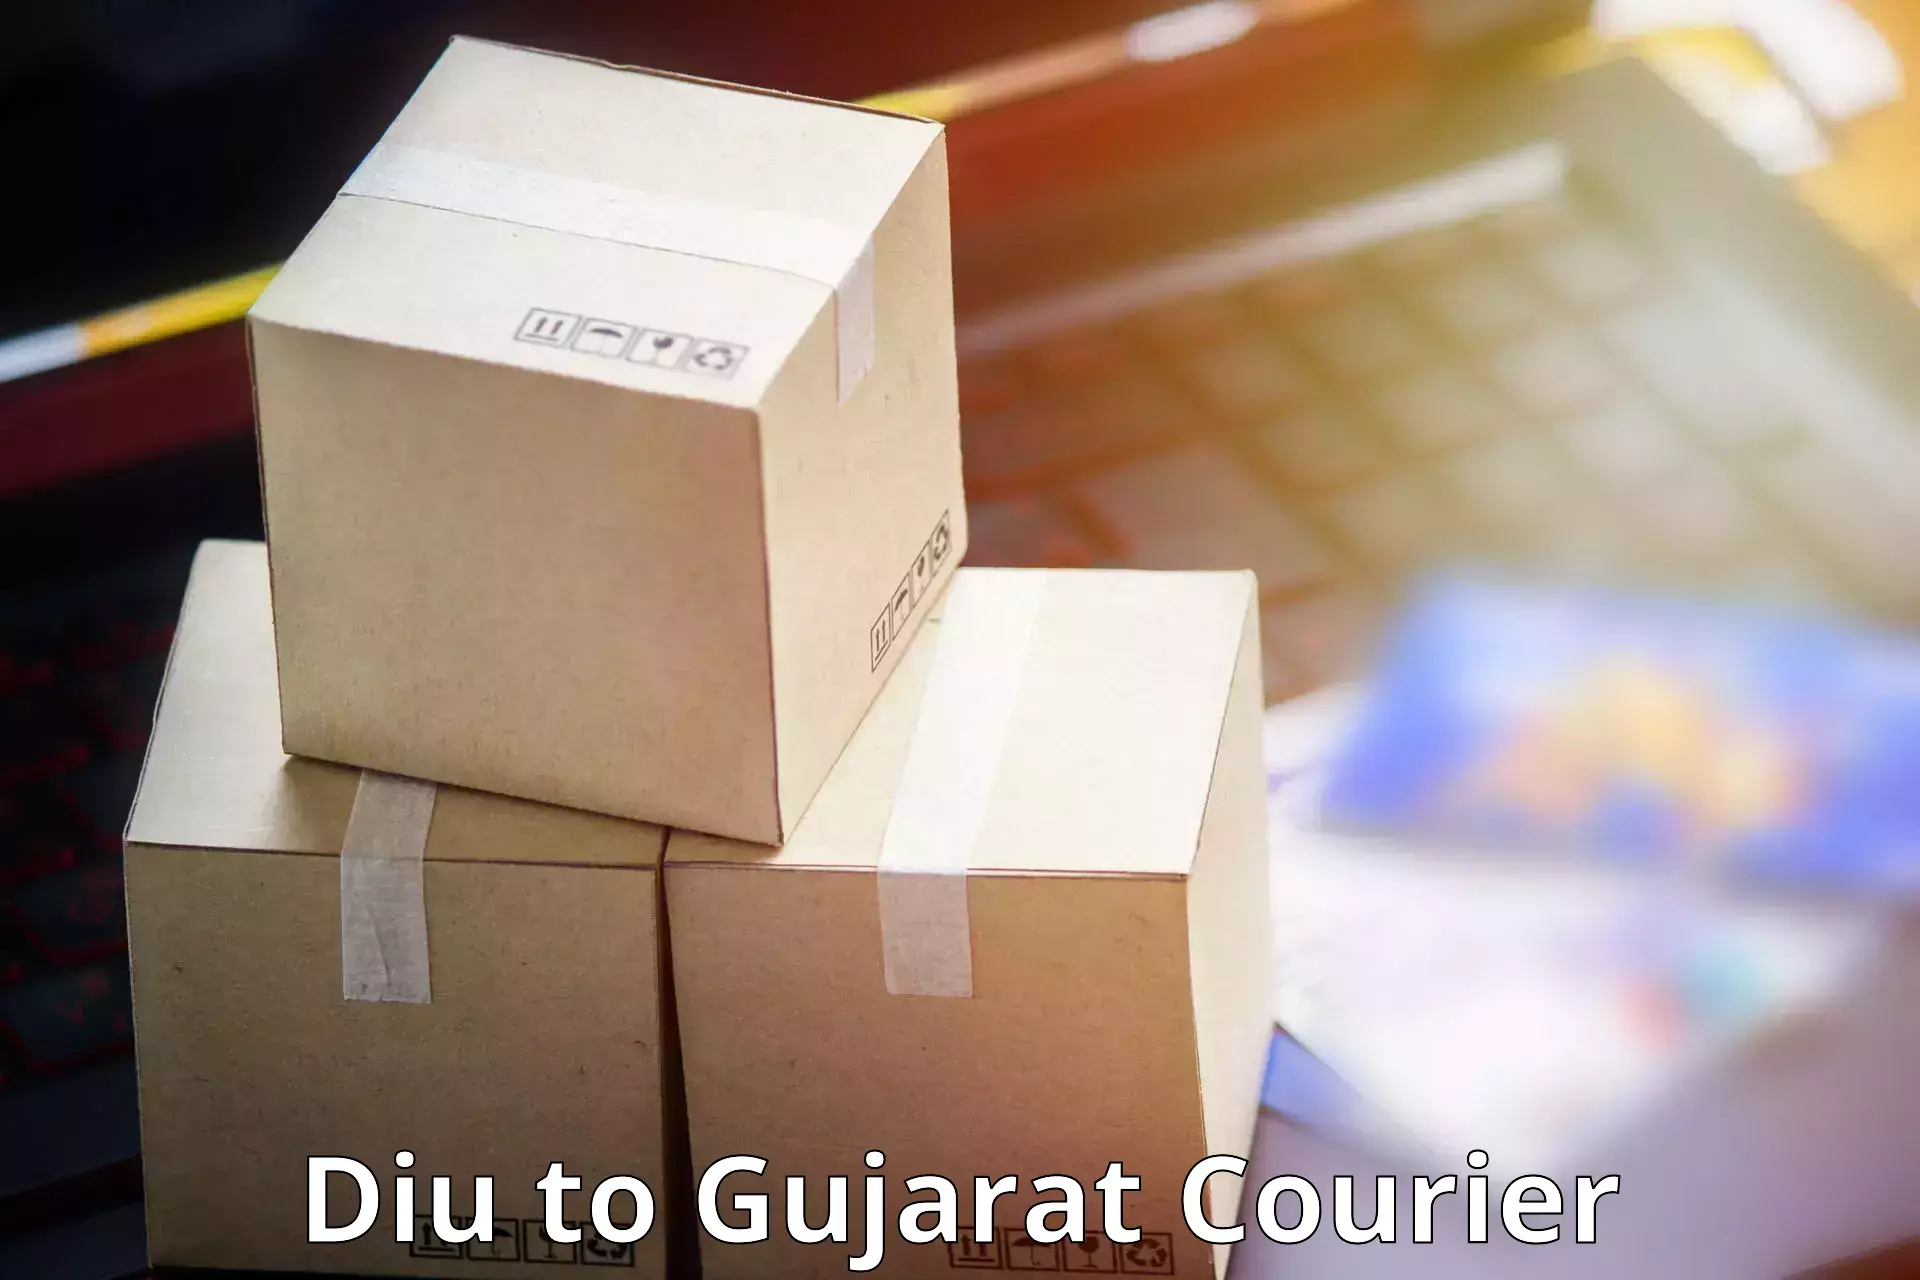 Courier app Diu to Chikhli